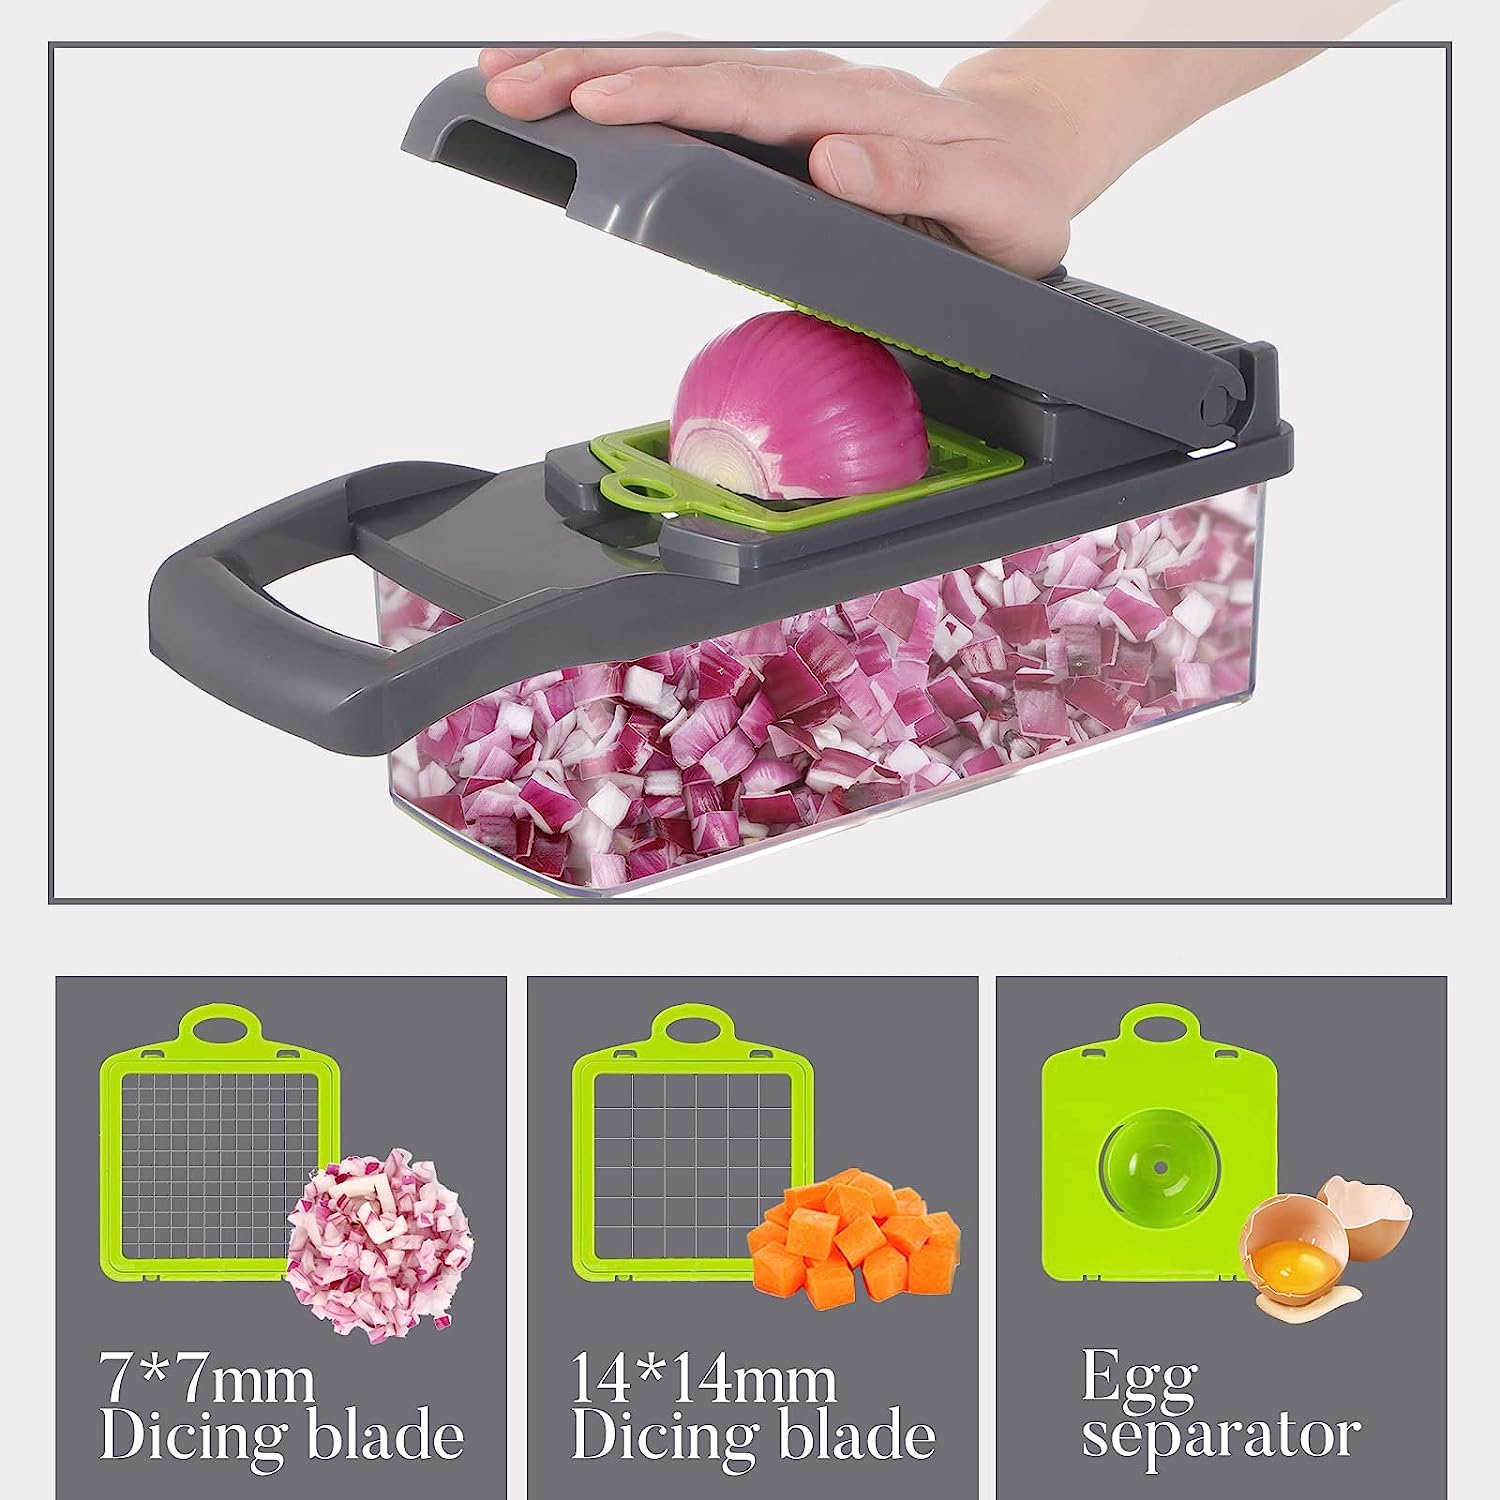 "Efficient 13-in-1 Vegetable/Onion Chopper: Multifunctional Veggie Slicer with 8 Blades, Kitchen Gadget for Precision Cutting, Dicing, and Slicing - Includes Container for Convenient Food Prep"